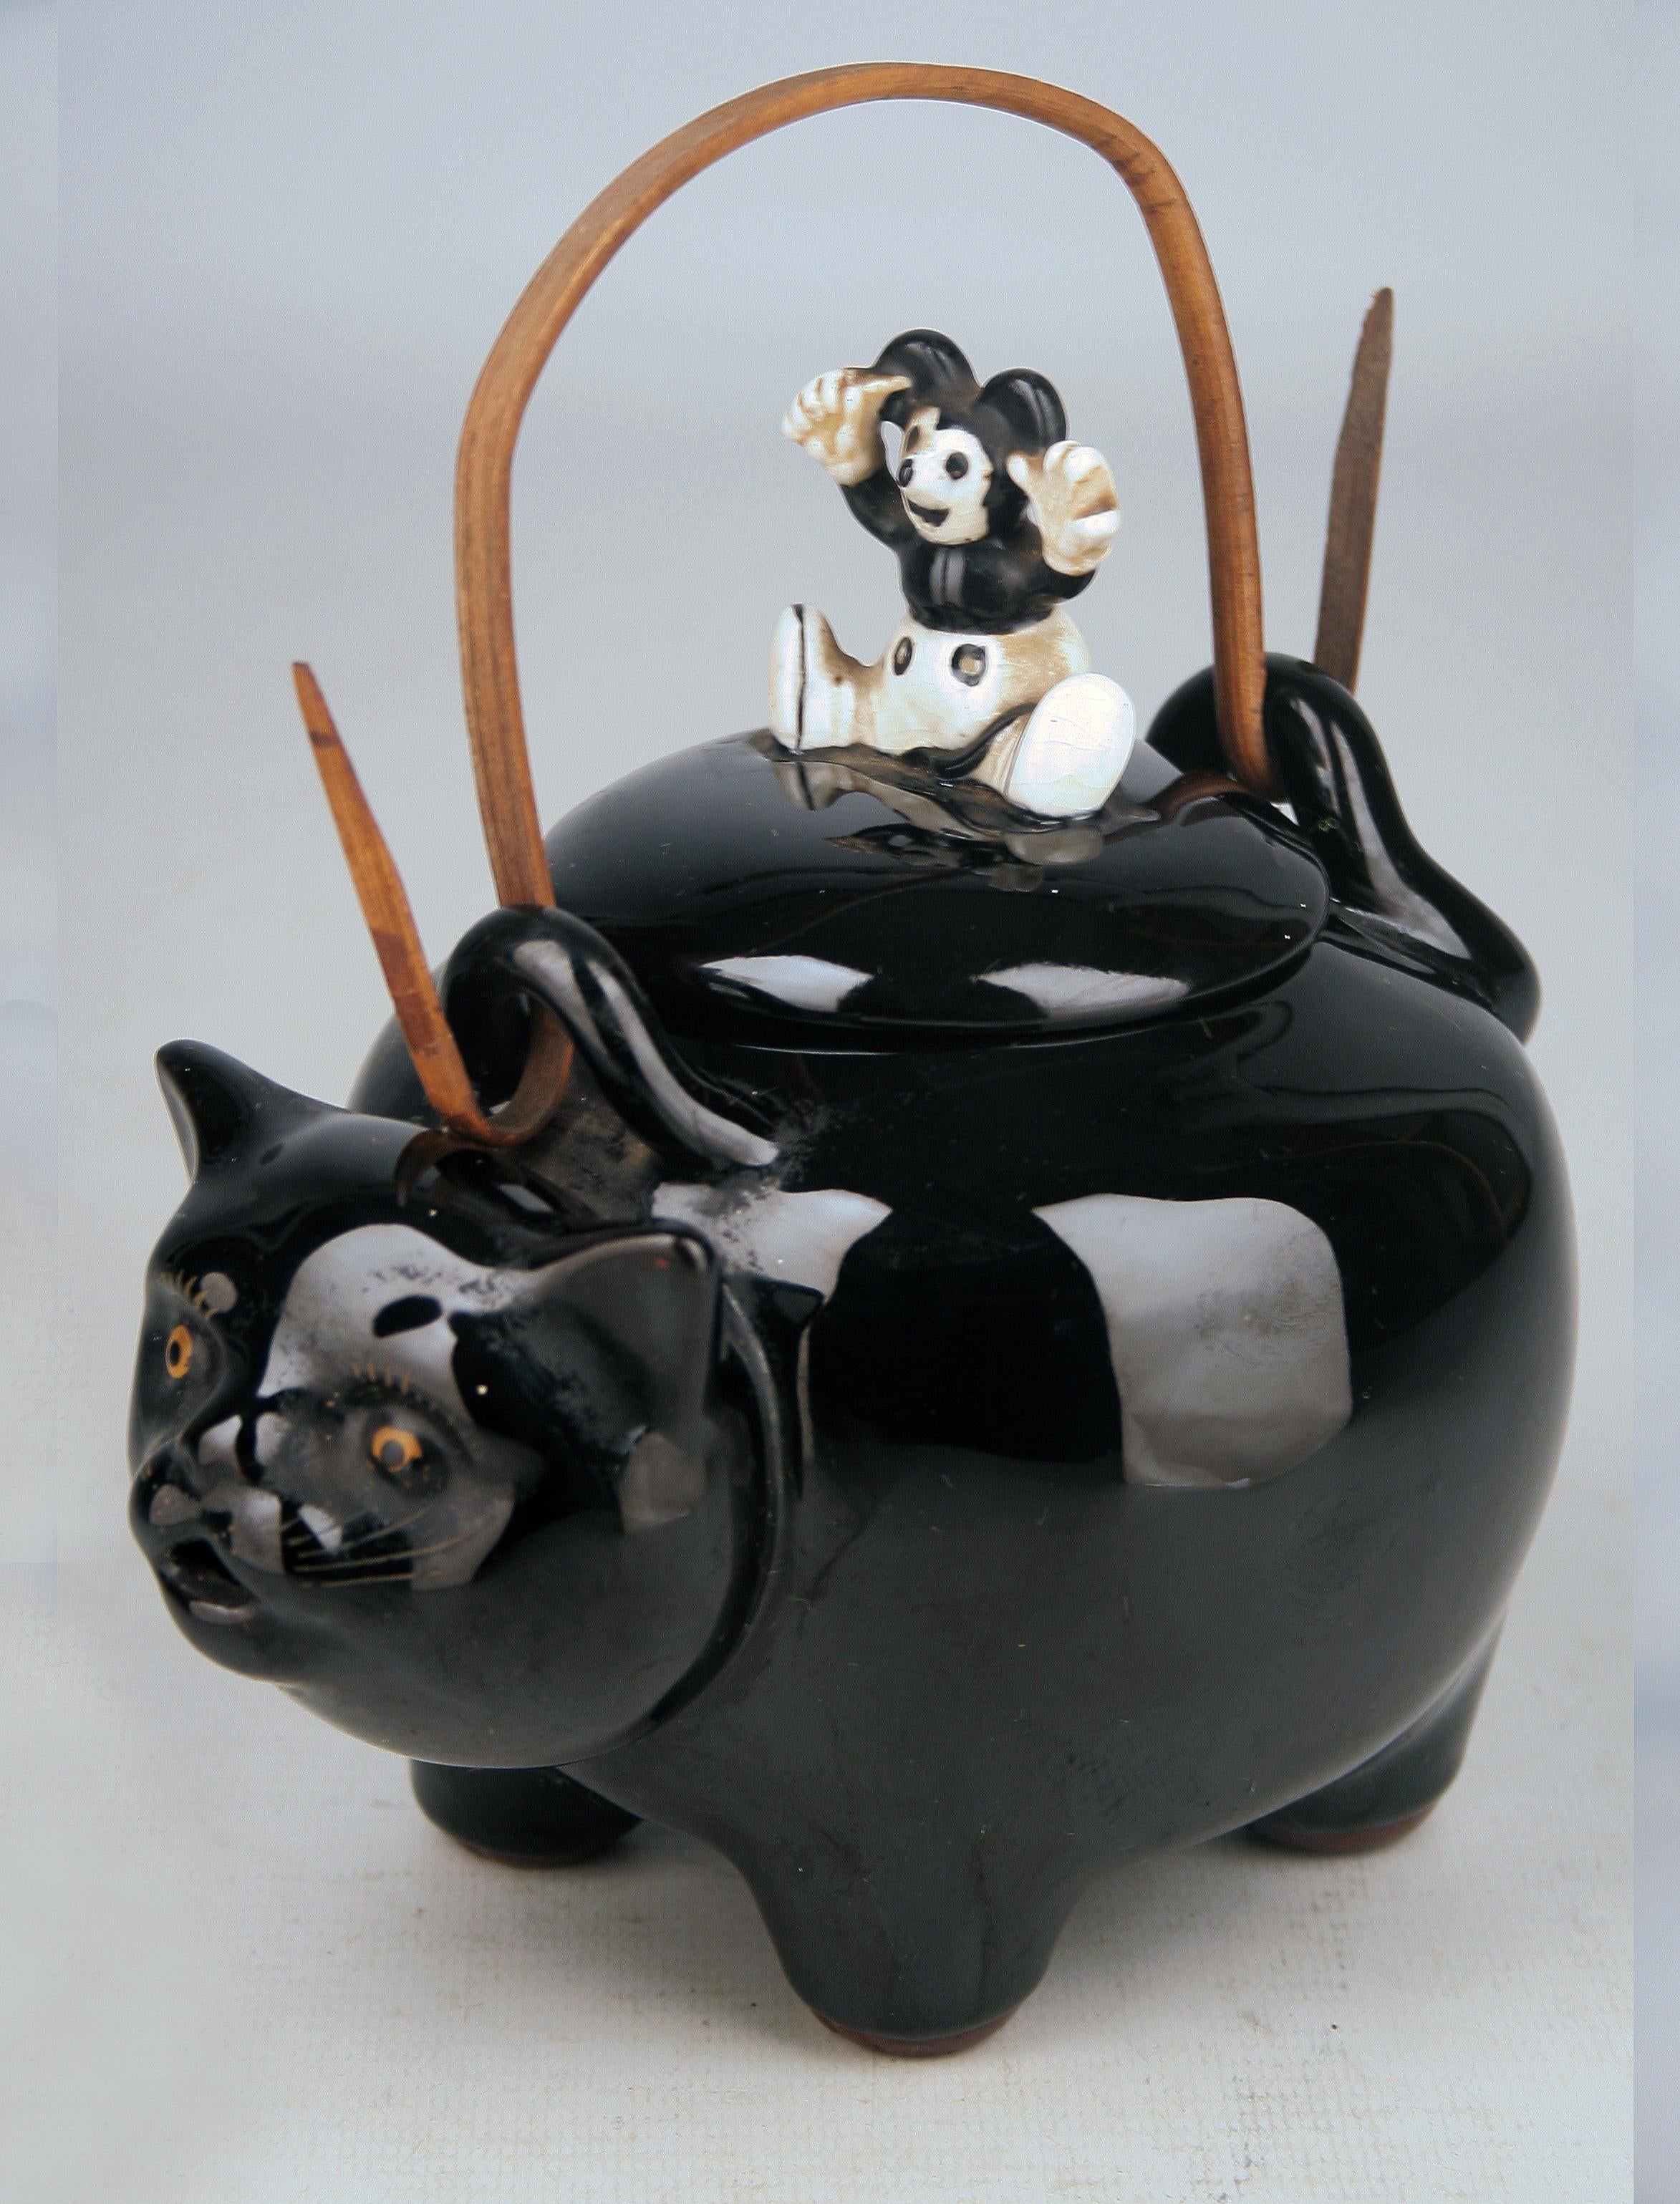 20th century/Shōwa era japanese glazed porcelain teapot of black cat with mouse Lid

By: unknown
Material: porcelain, paint, wood, ceramic
Technique: pressed, molded, carved, painted, glazed, hand-painted, hand-carved
Dimensions: 7 in x 5 in x 7